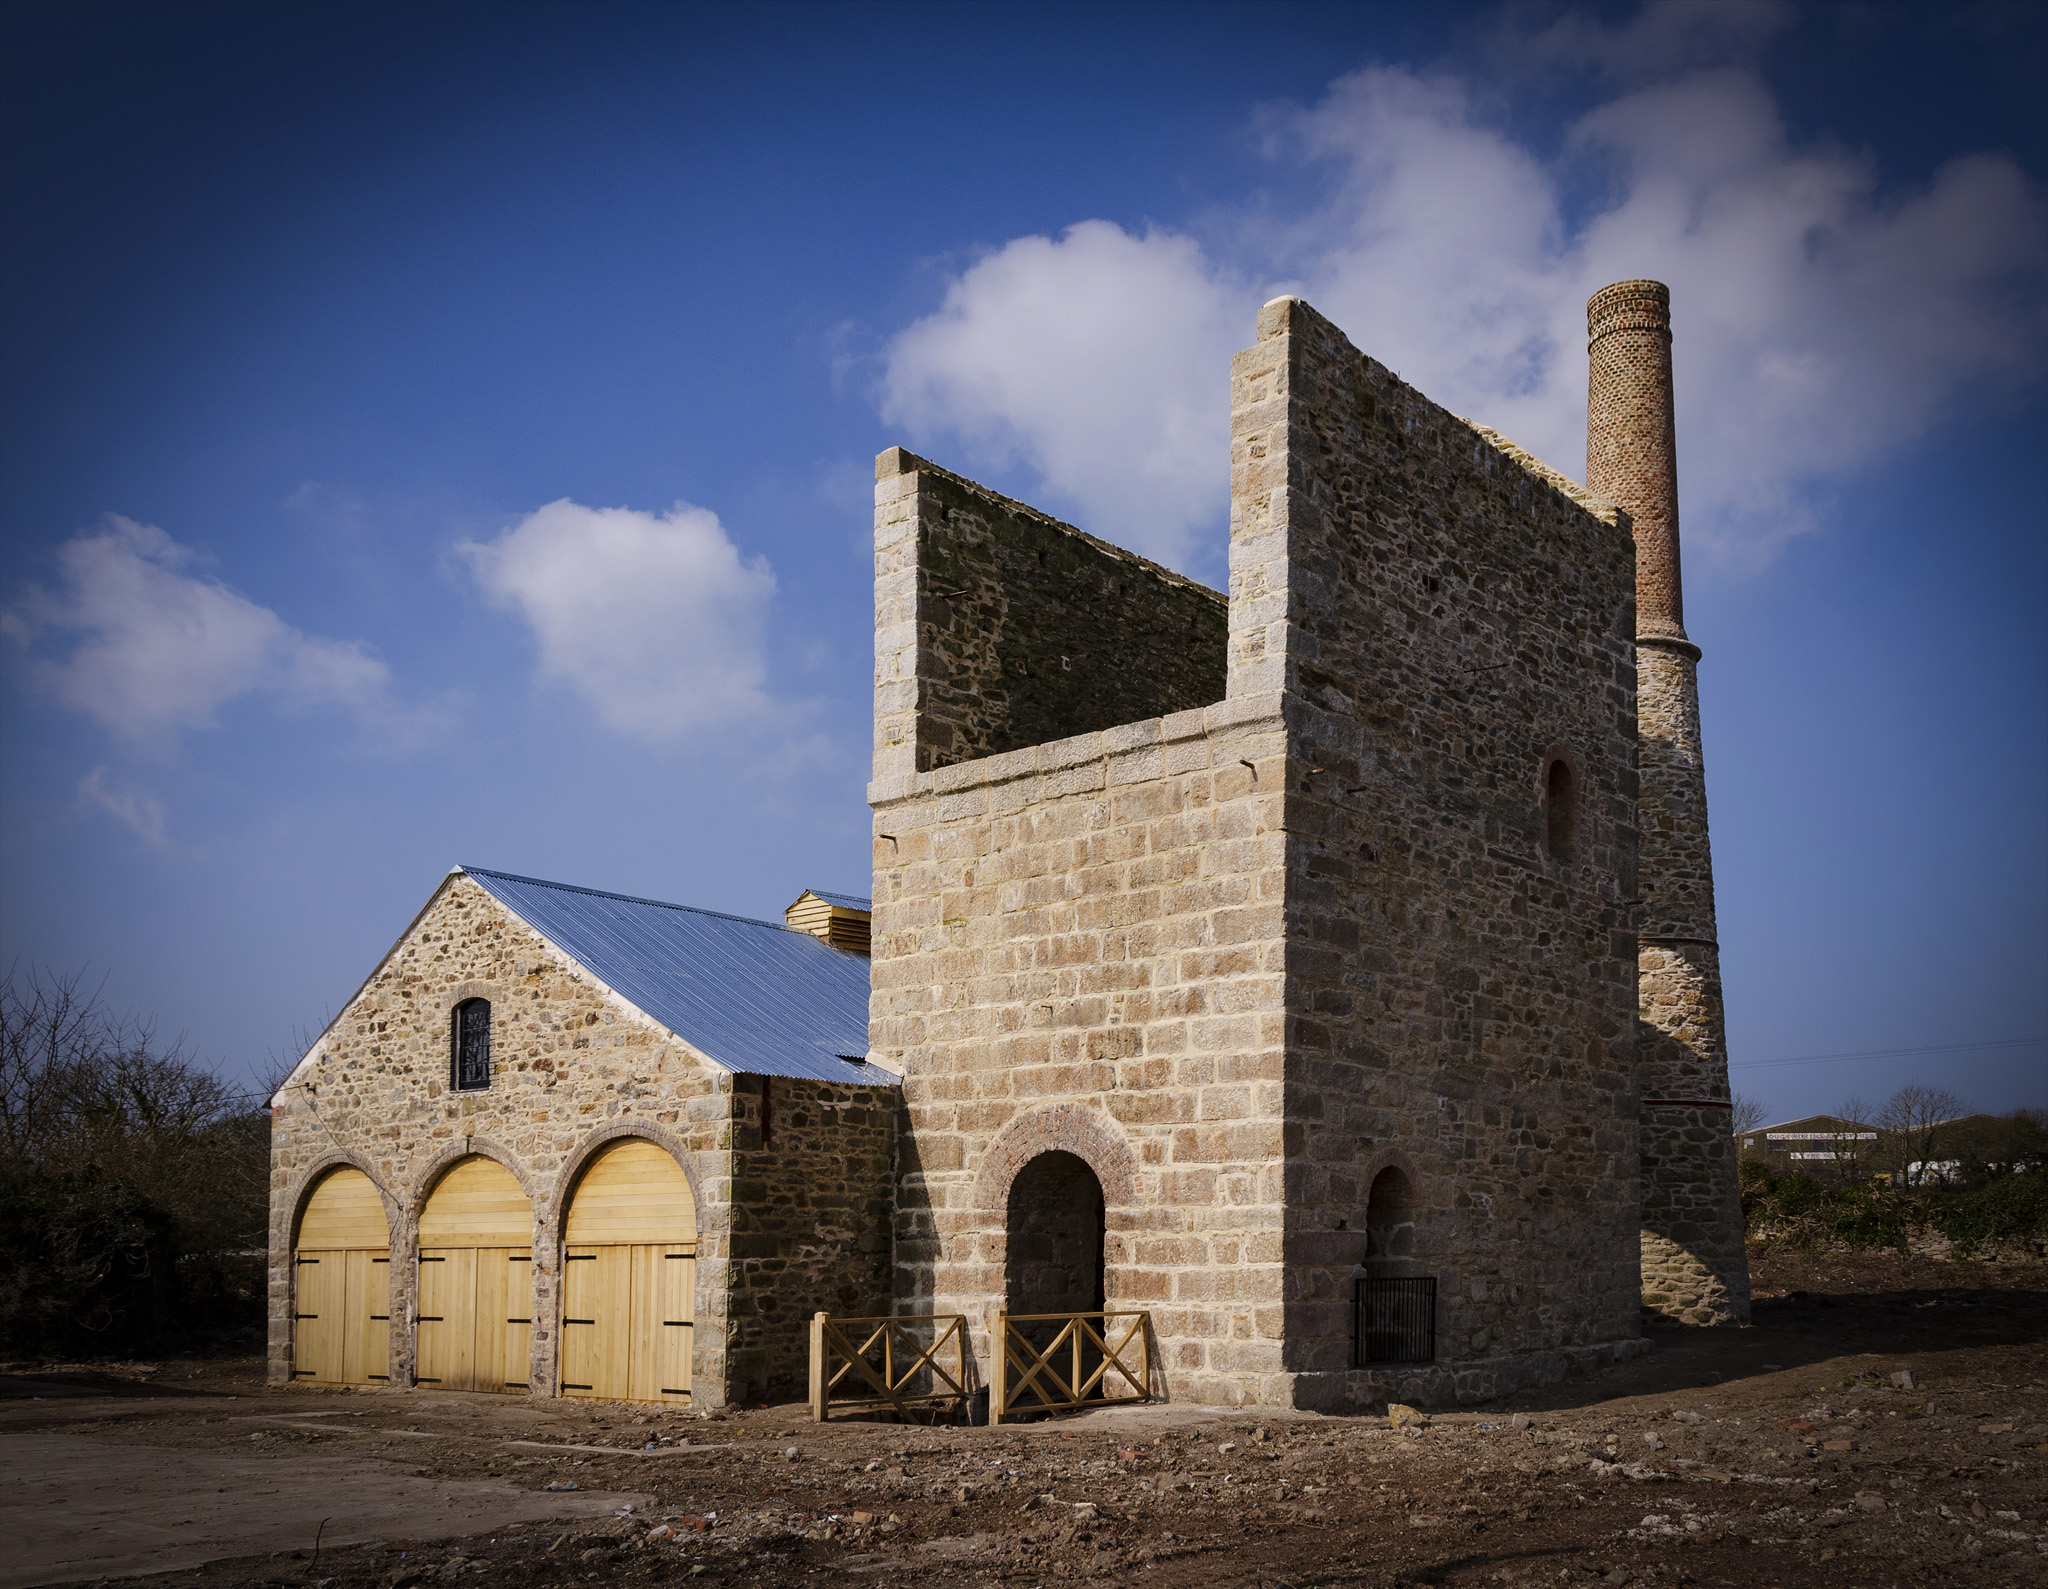 The restored pumping engine and boiler houses at Wheal Busy near Chacewater